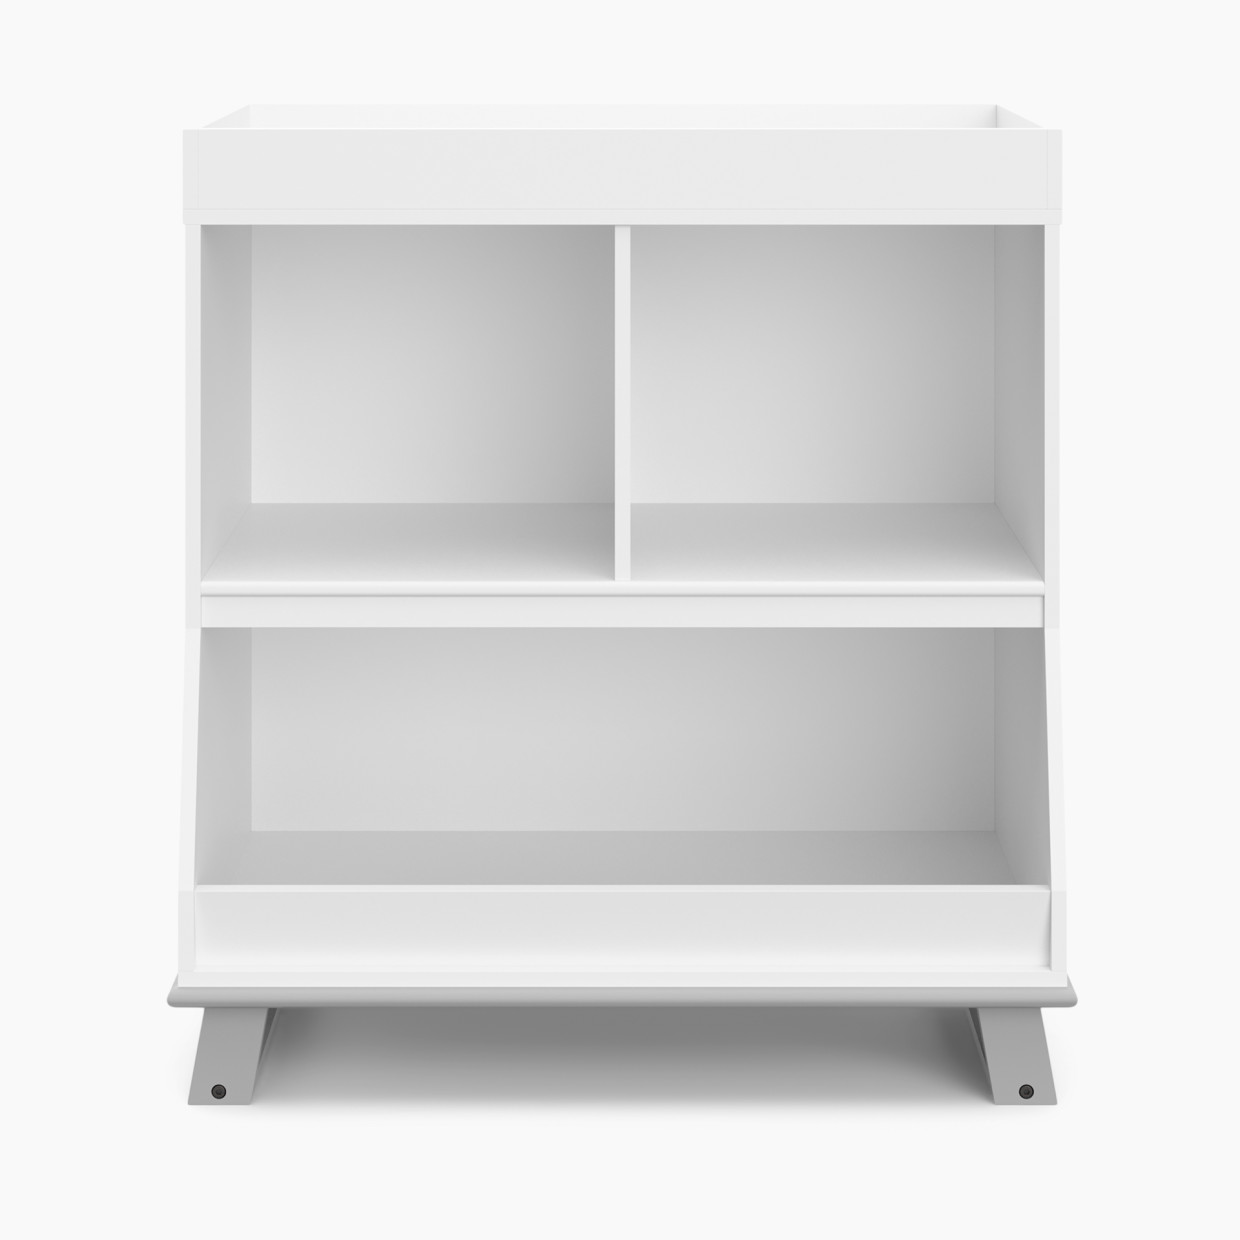 Storkcraft Modern Convertible Changing Table - White/Pebble Gray.